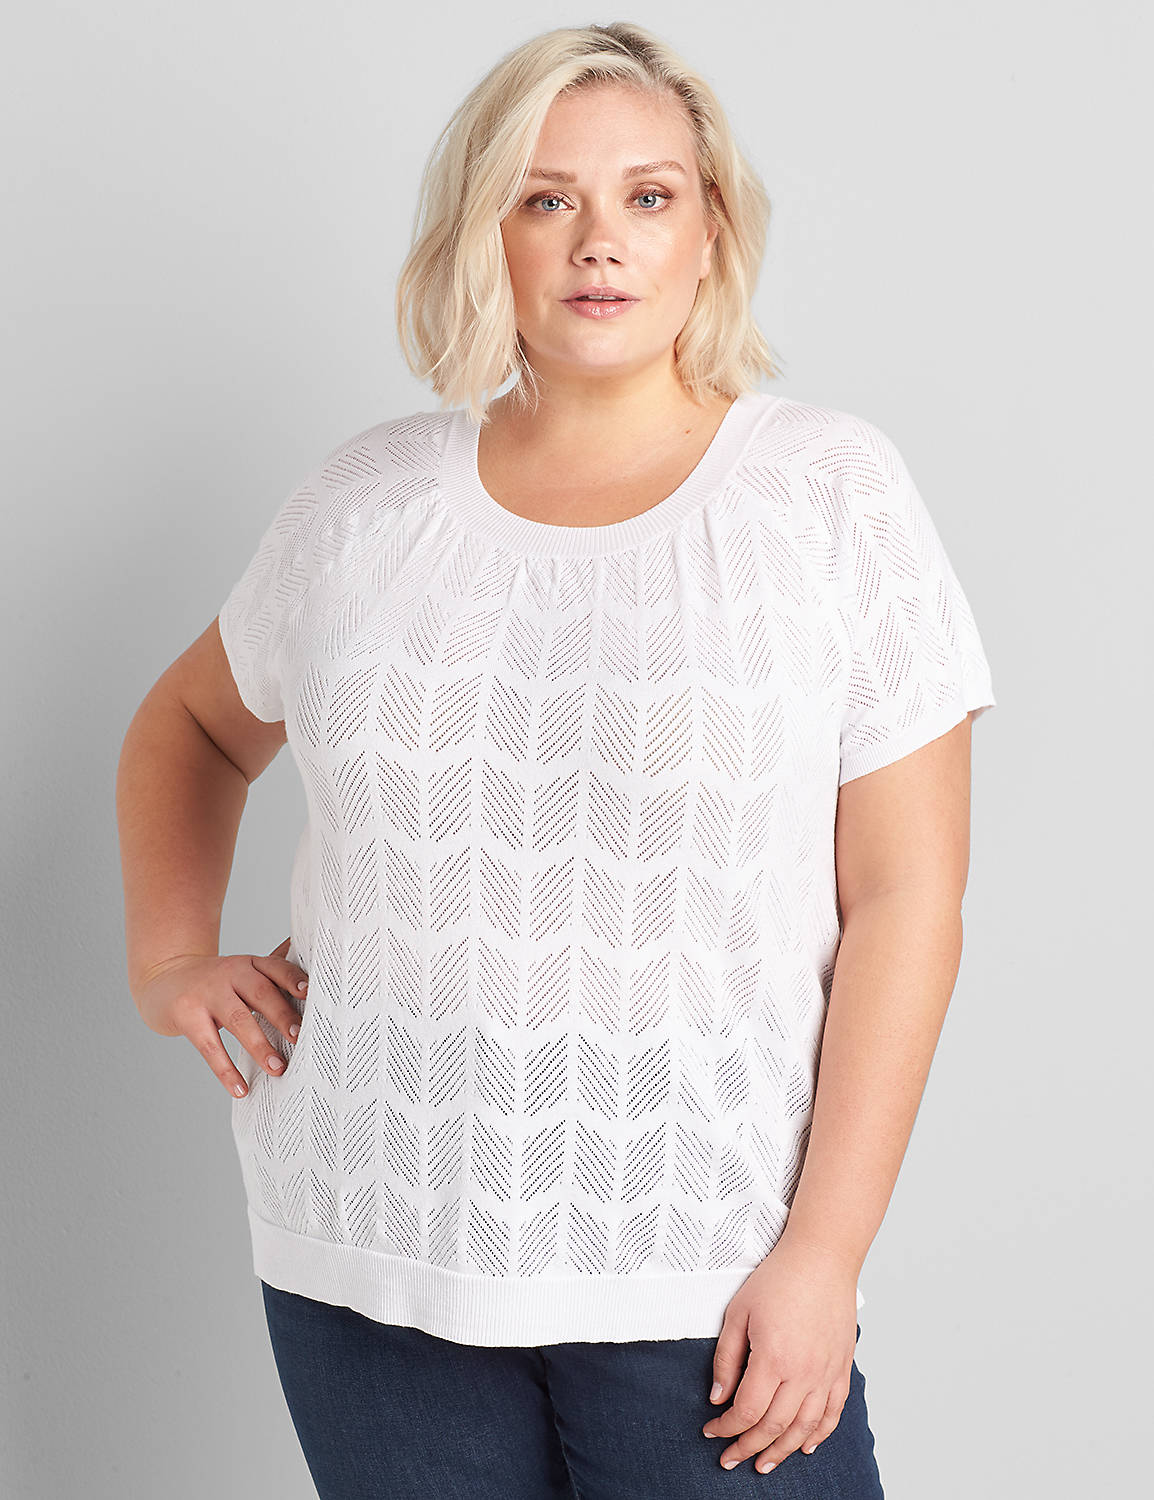 Short Sleeve Scoop Neck Raglan Pullover with Texture Stitch 1118946:Ascena White:18/20 Product Image 1